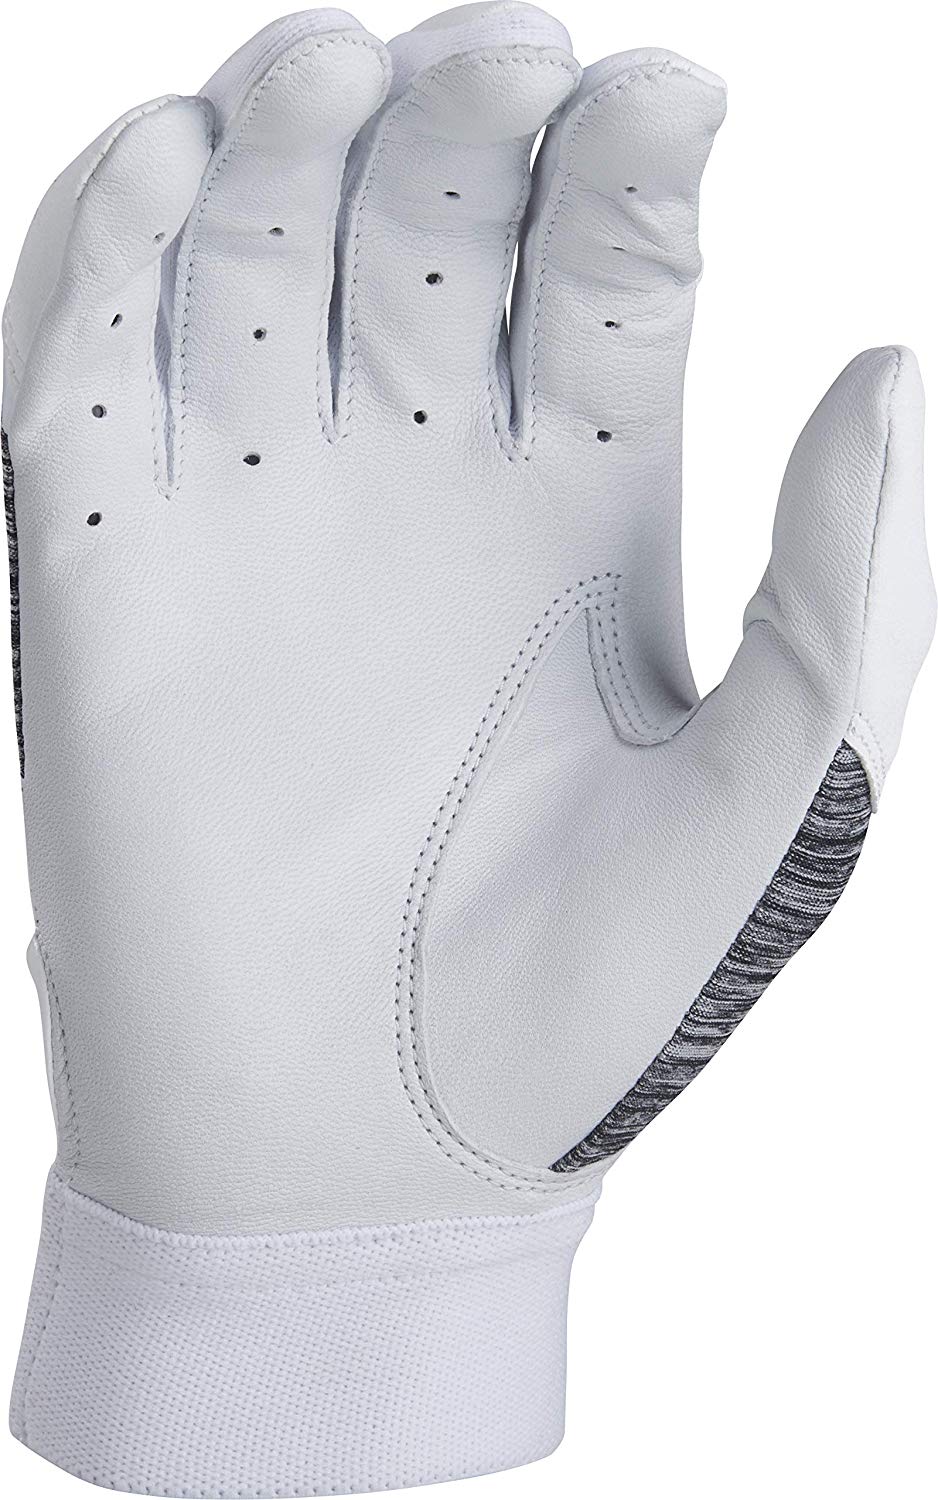 Rawlings Youth 5150 Home Batting Gloves | Midway Sports.